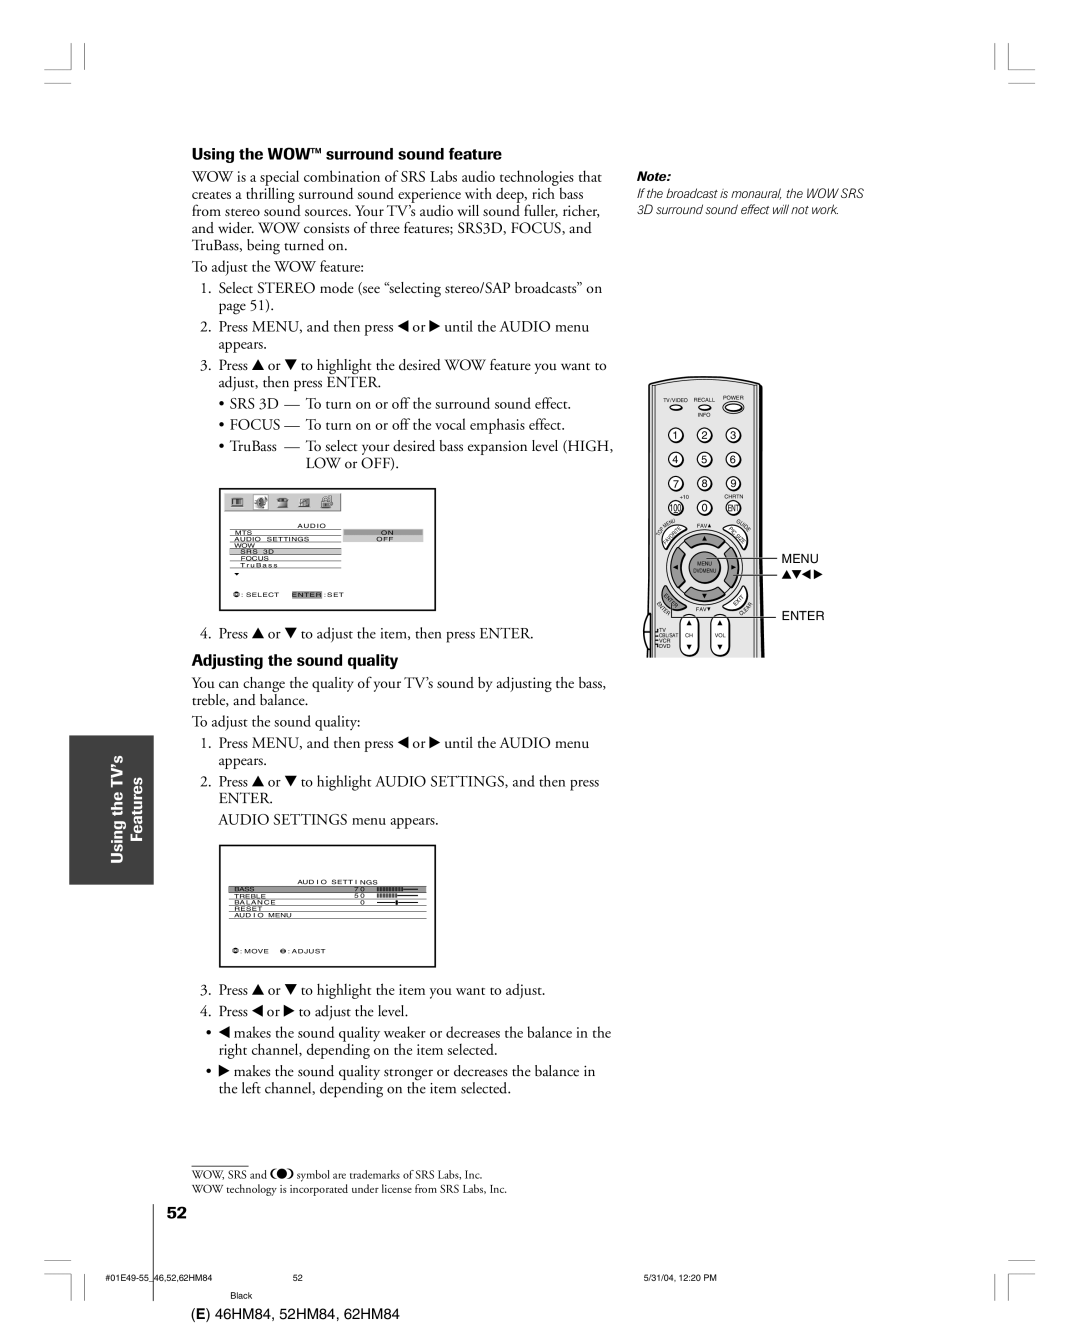 Toshiba 46HM84 owner manual Using the WOWª surround sound feature, Adjusting the sound quality, Audio Settings menu appears 